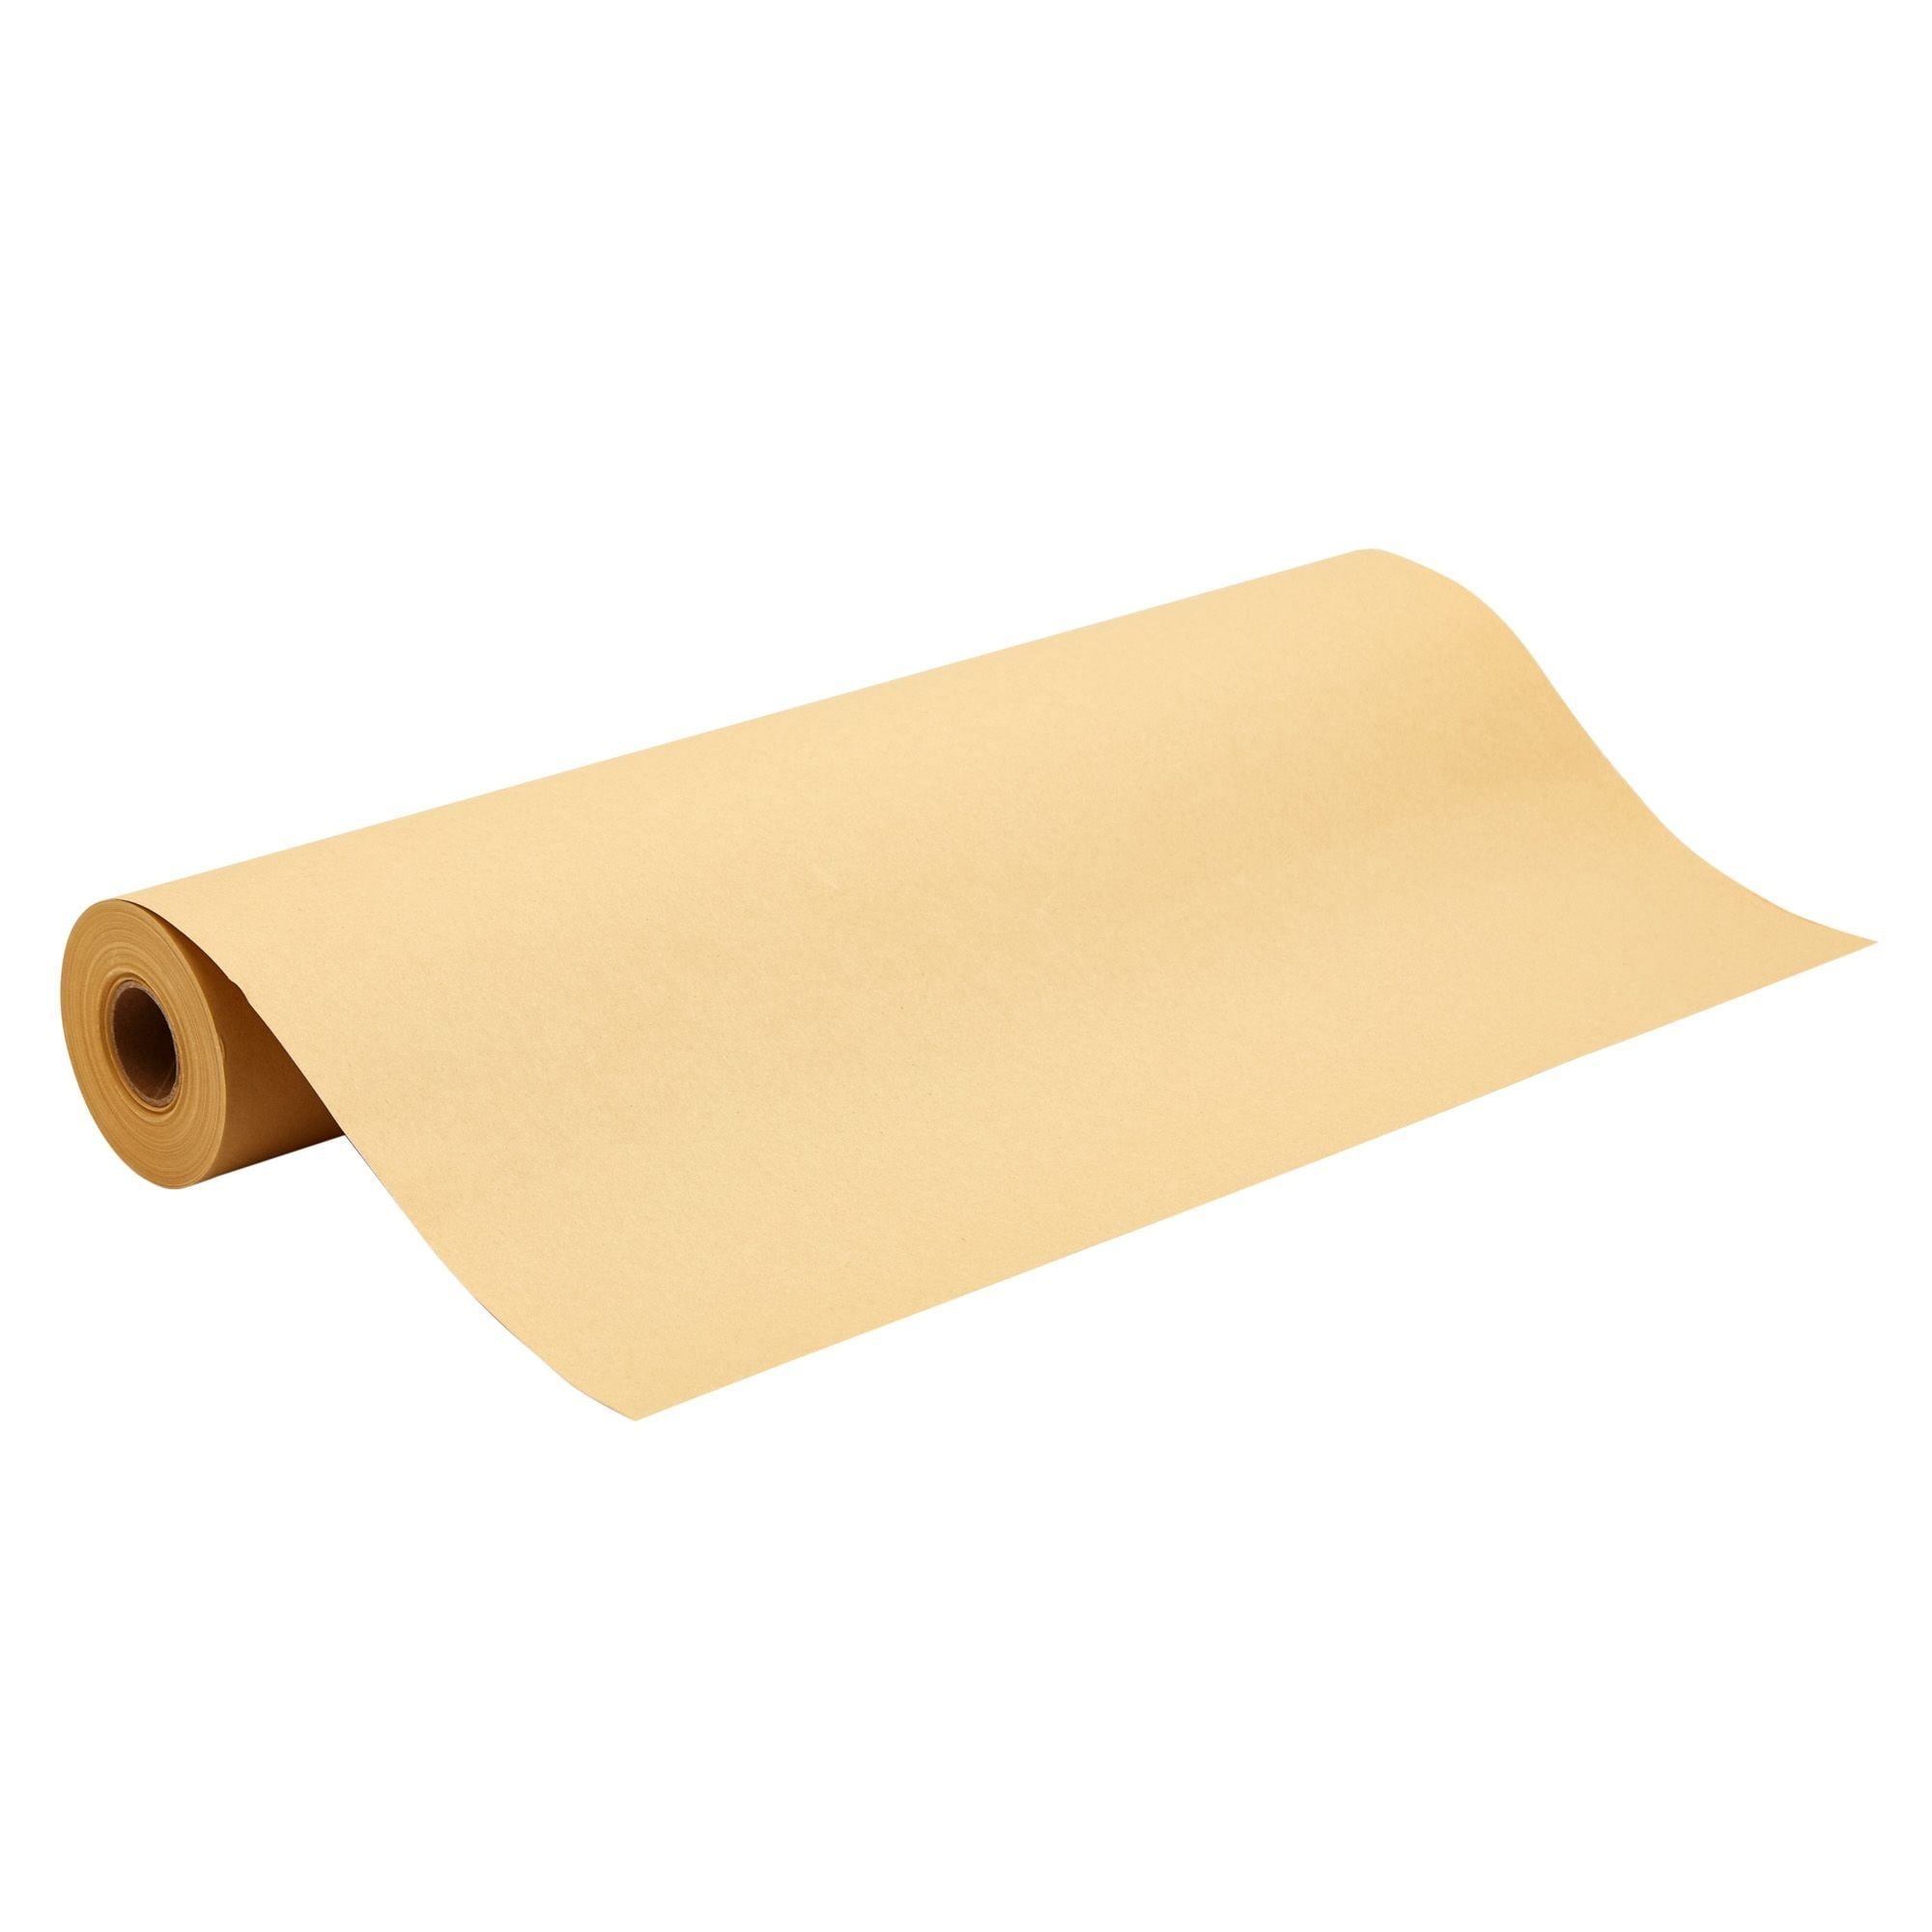 1pc Brown Kraft Paper Roll, 17.23 Inches X 16.4 Feet, For Gift